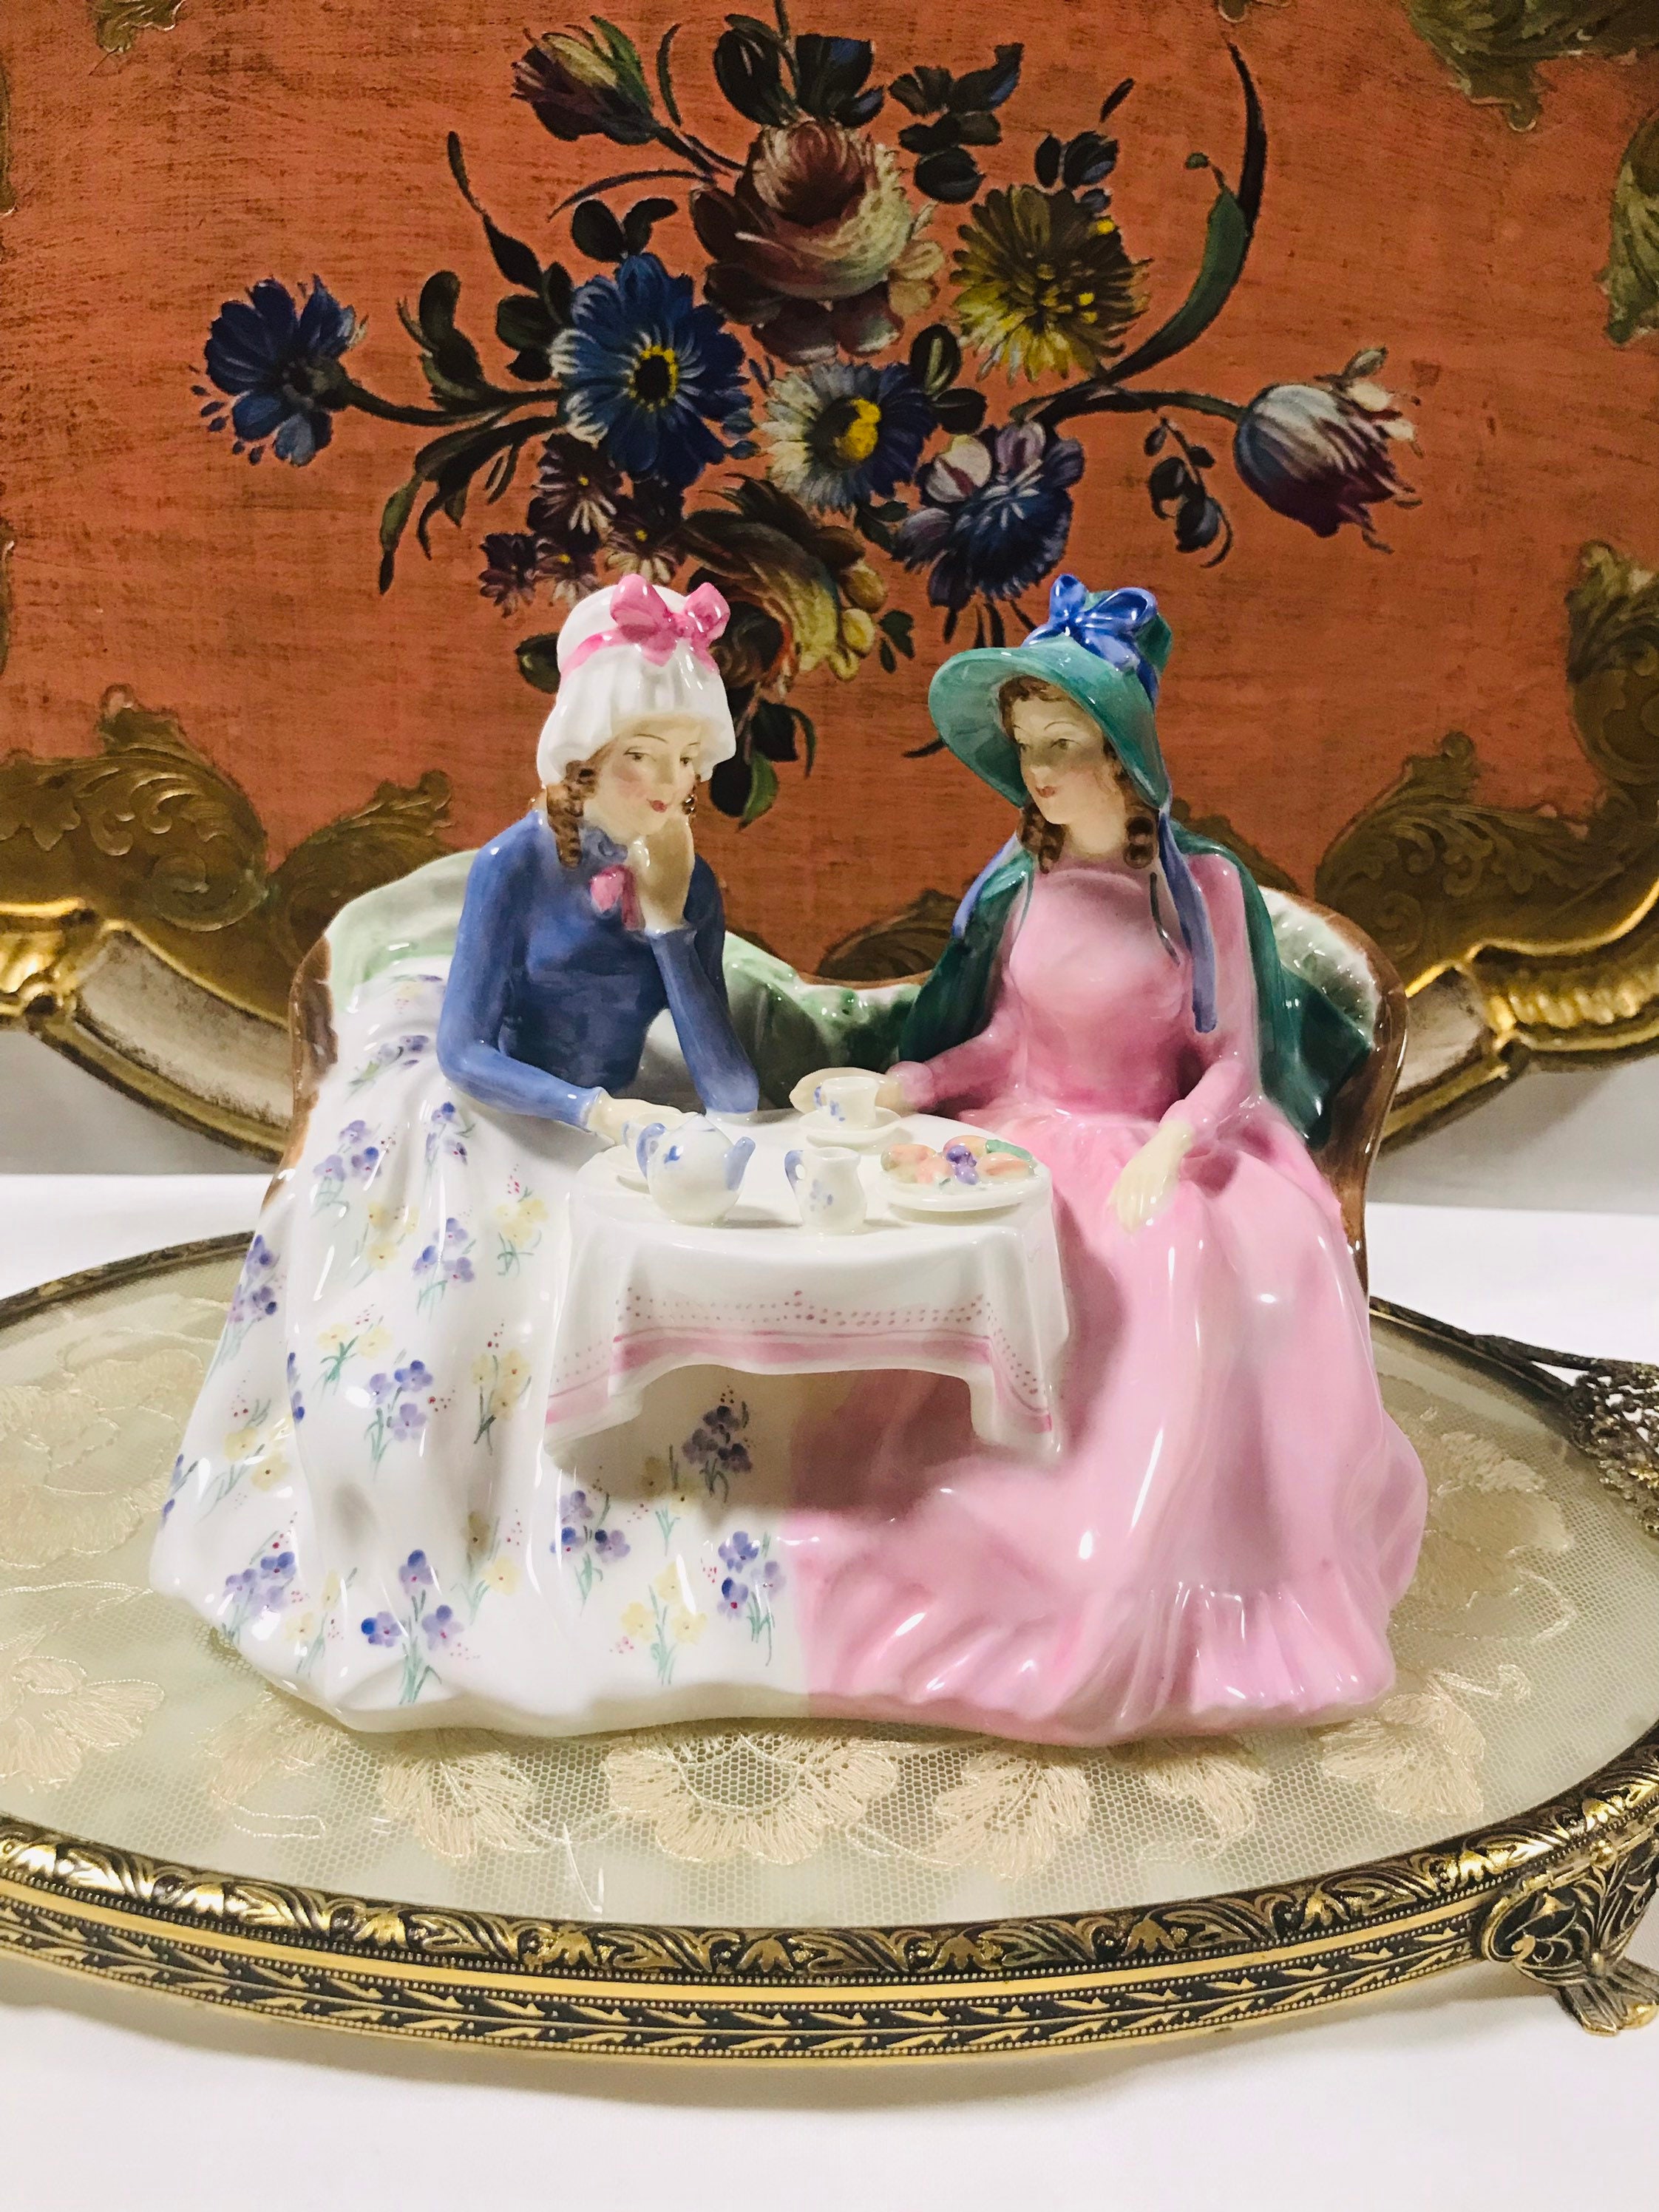 Old and rare Royal Doulton figurine Afternoon Tea 1747 Etsy 日本